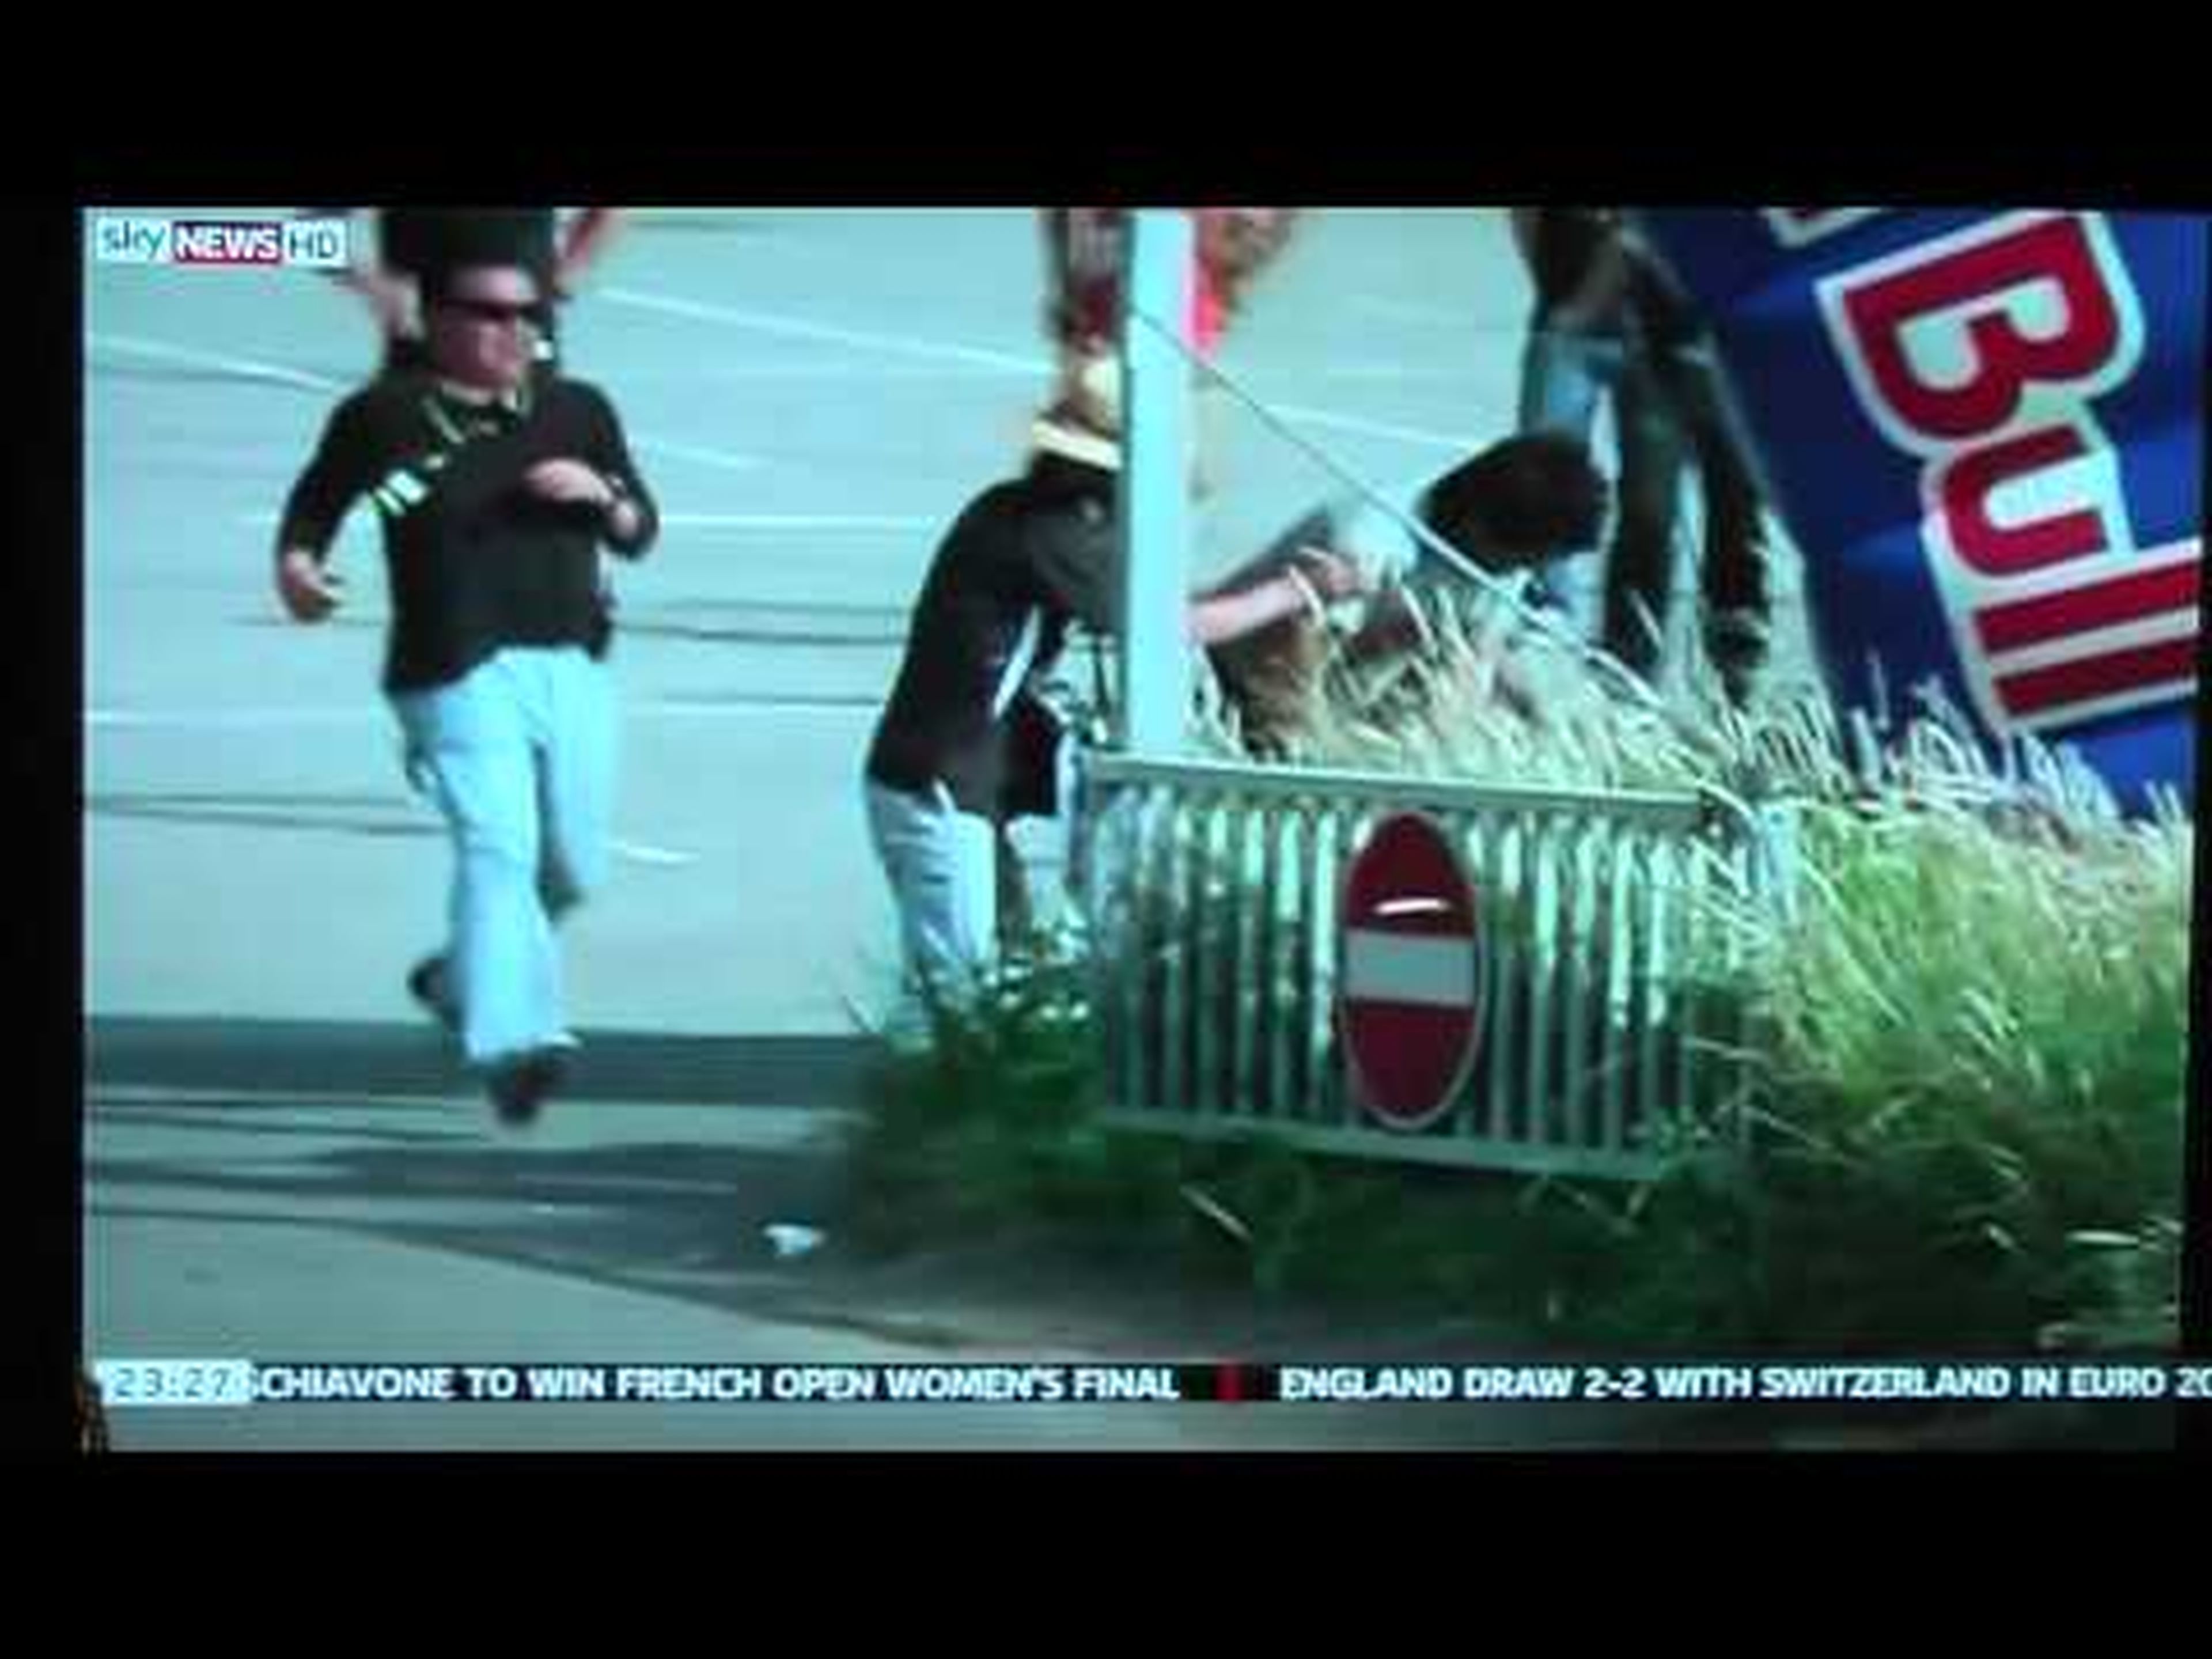 F1 2011 - Red Bull's Show in Japan - Buemi's strange accident with the fan